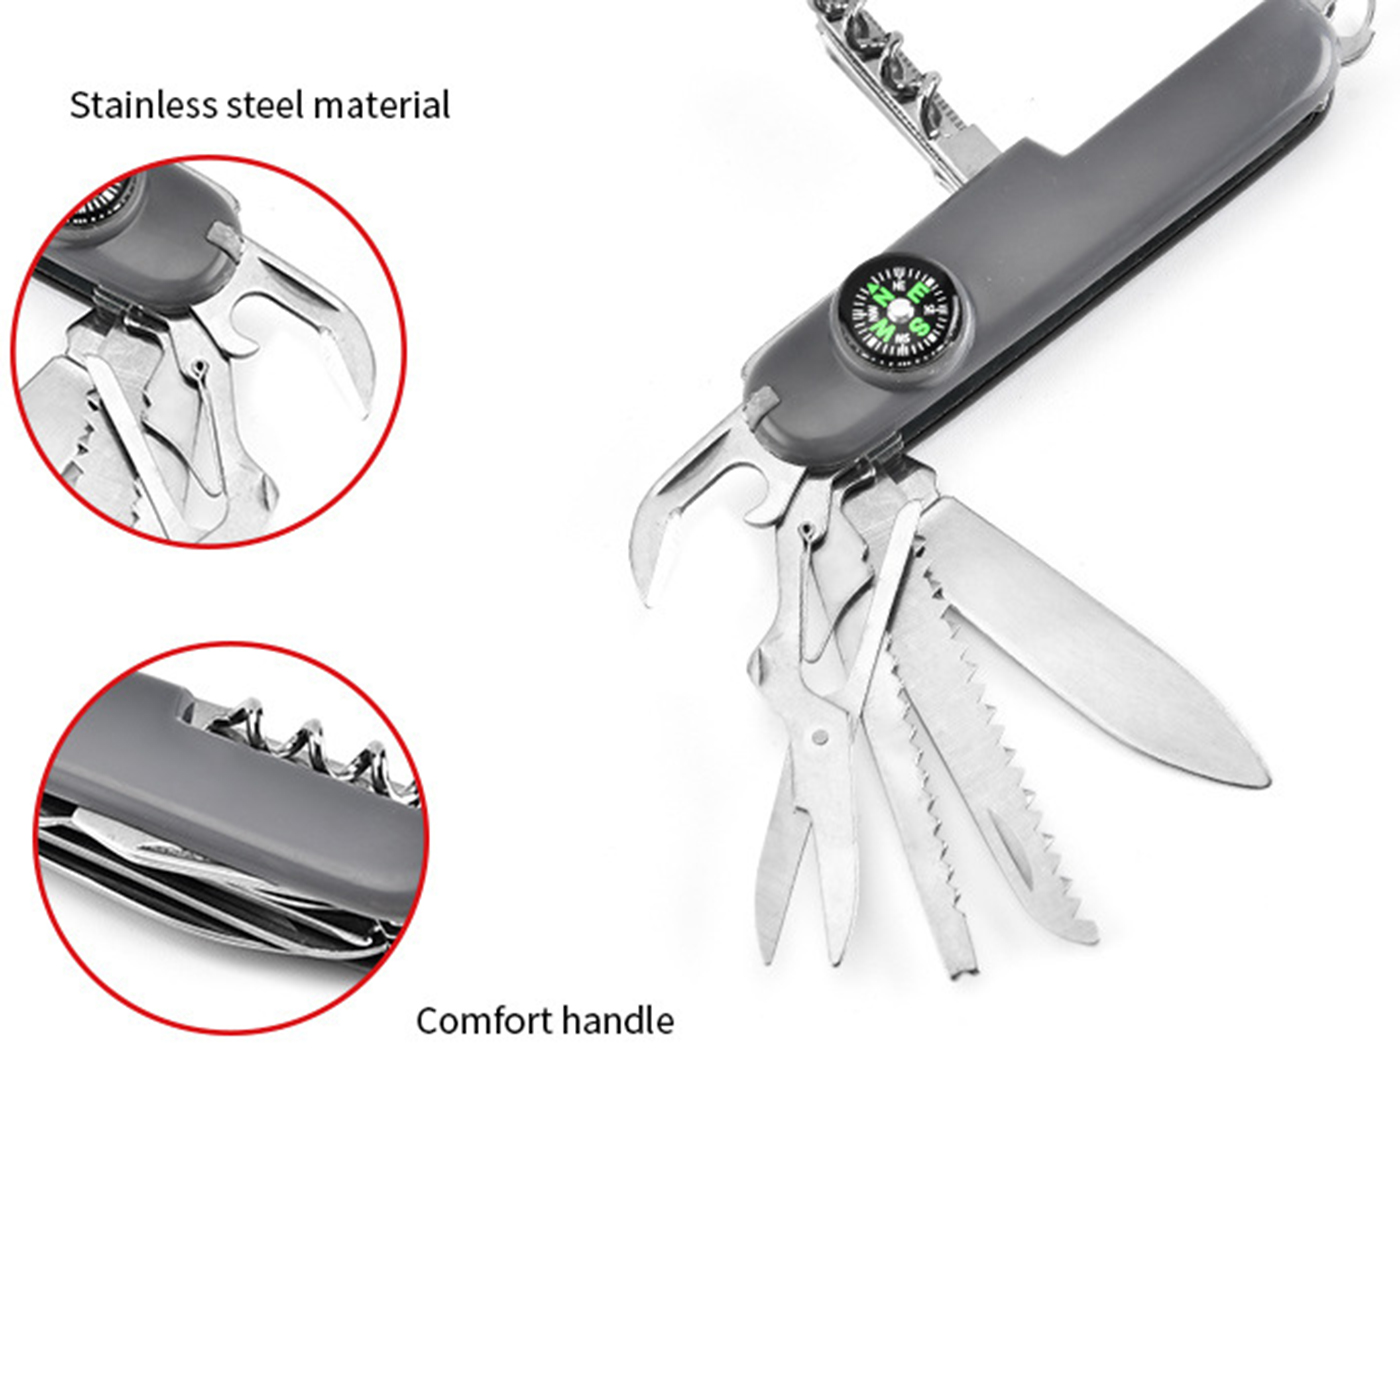 Multifunction Knife With Compass3